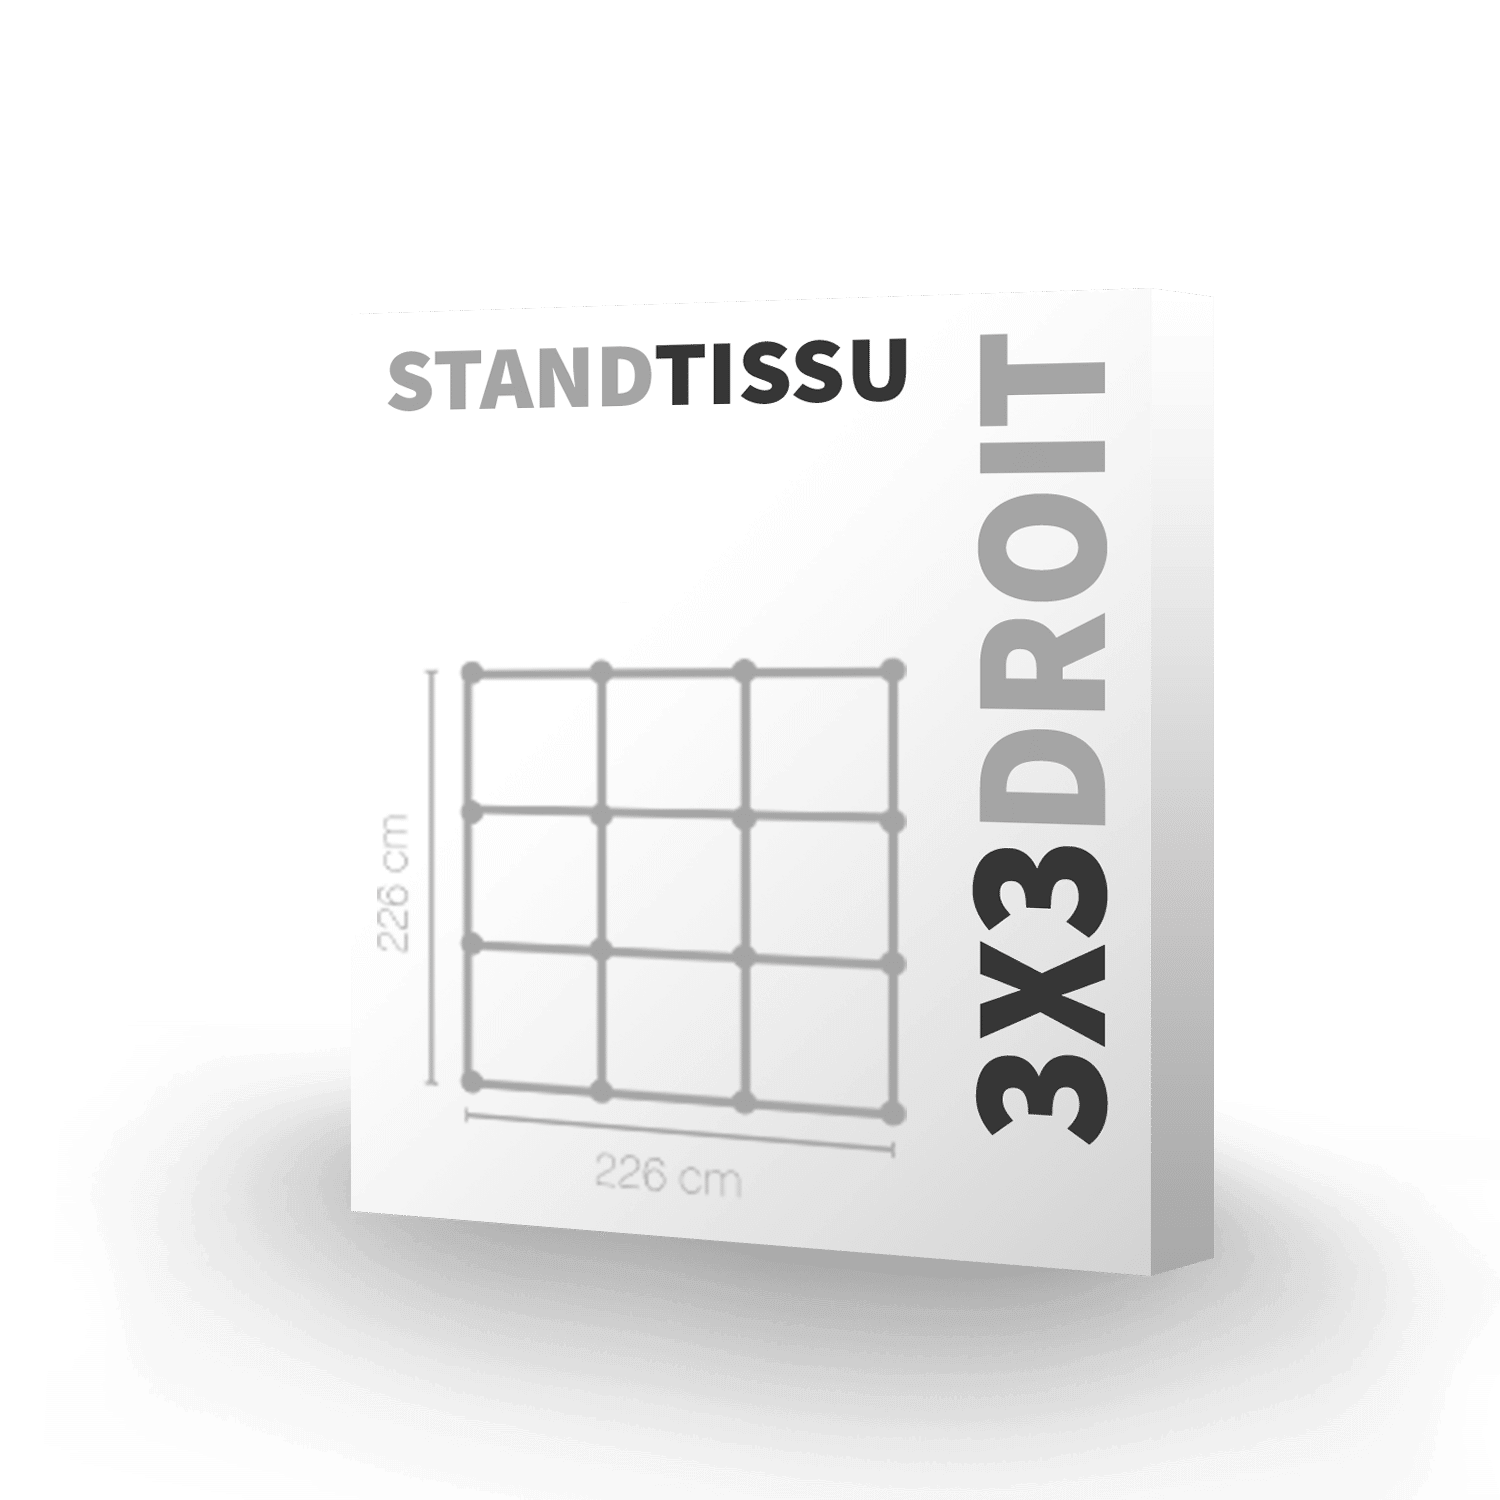 Stand tissu 3x3 droit kit complet recto 220g M1